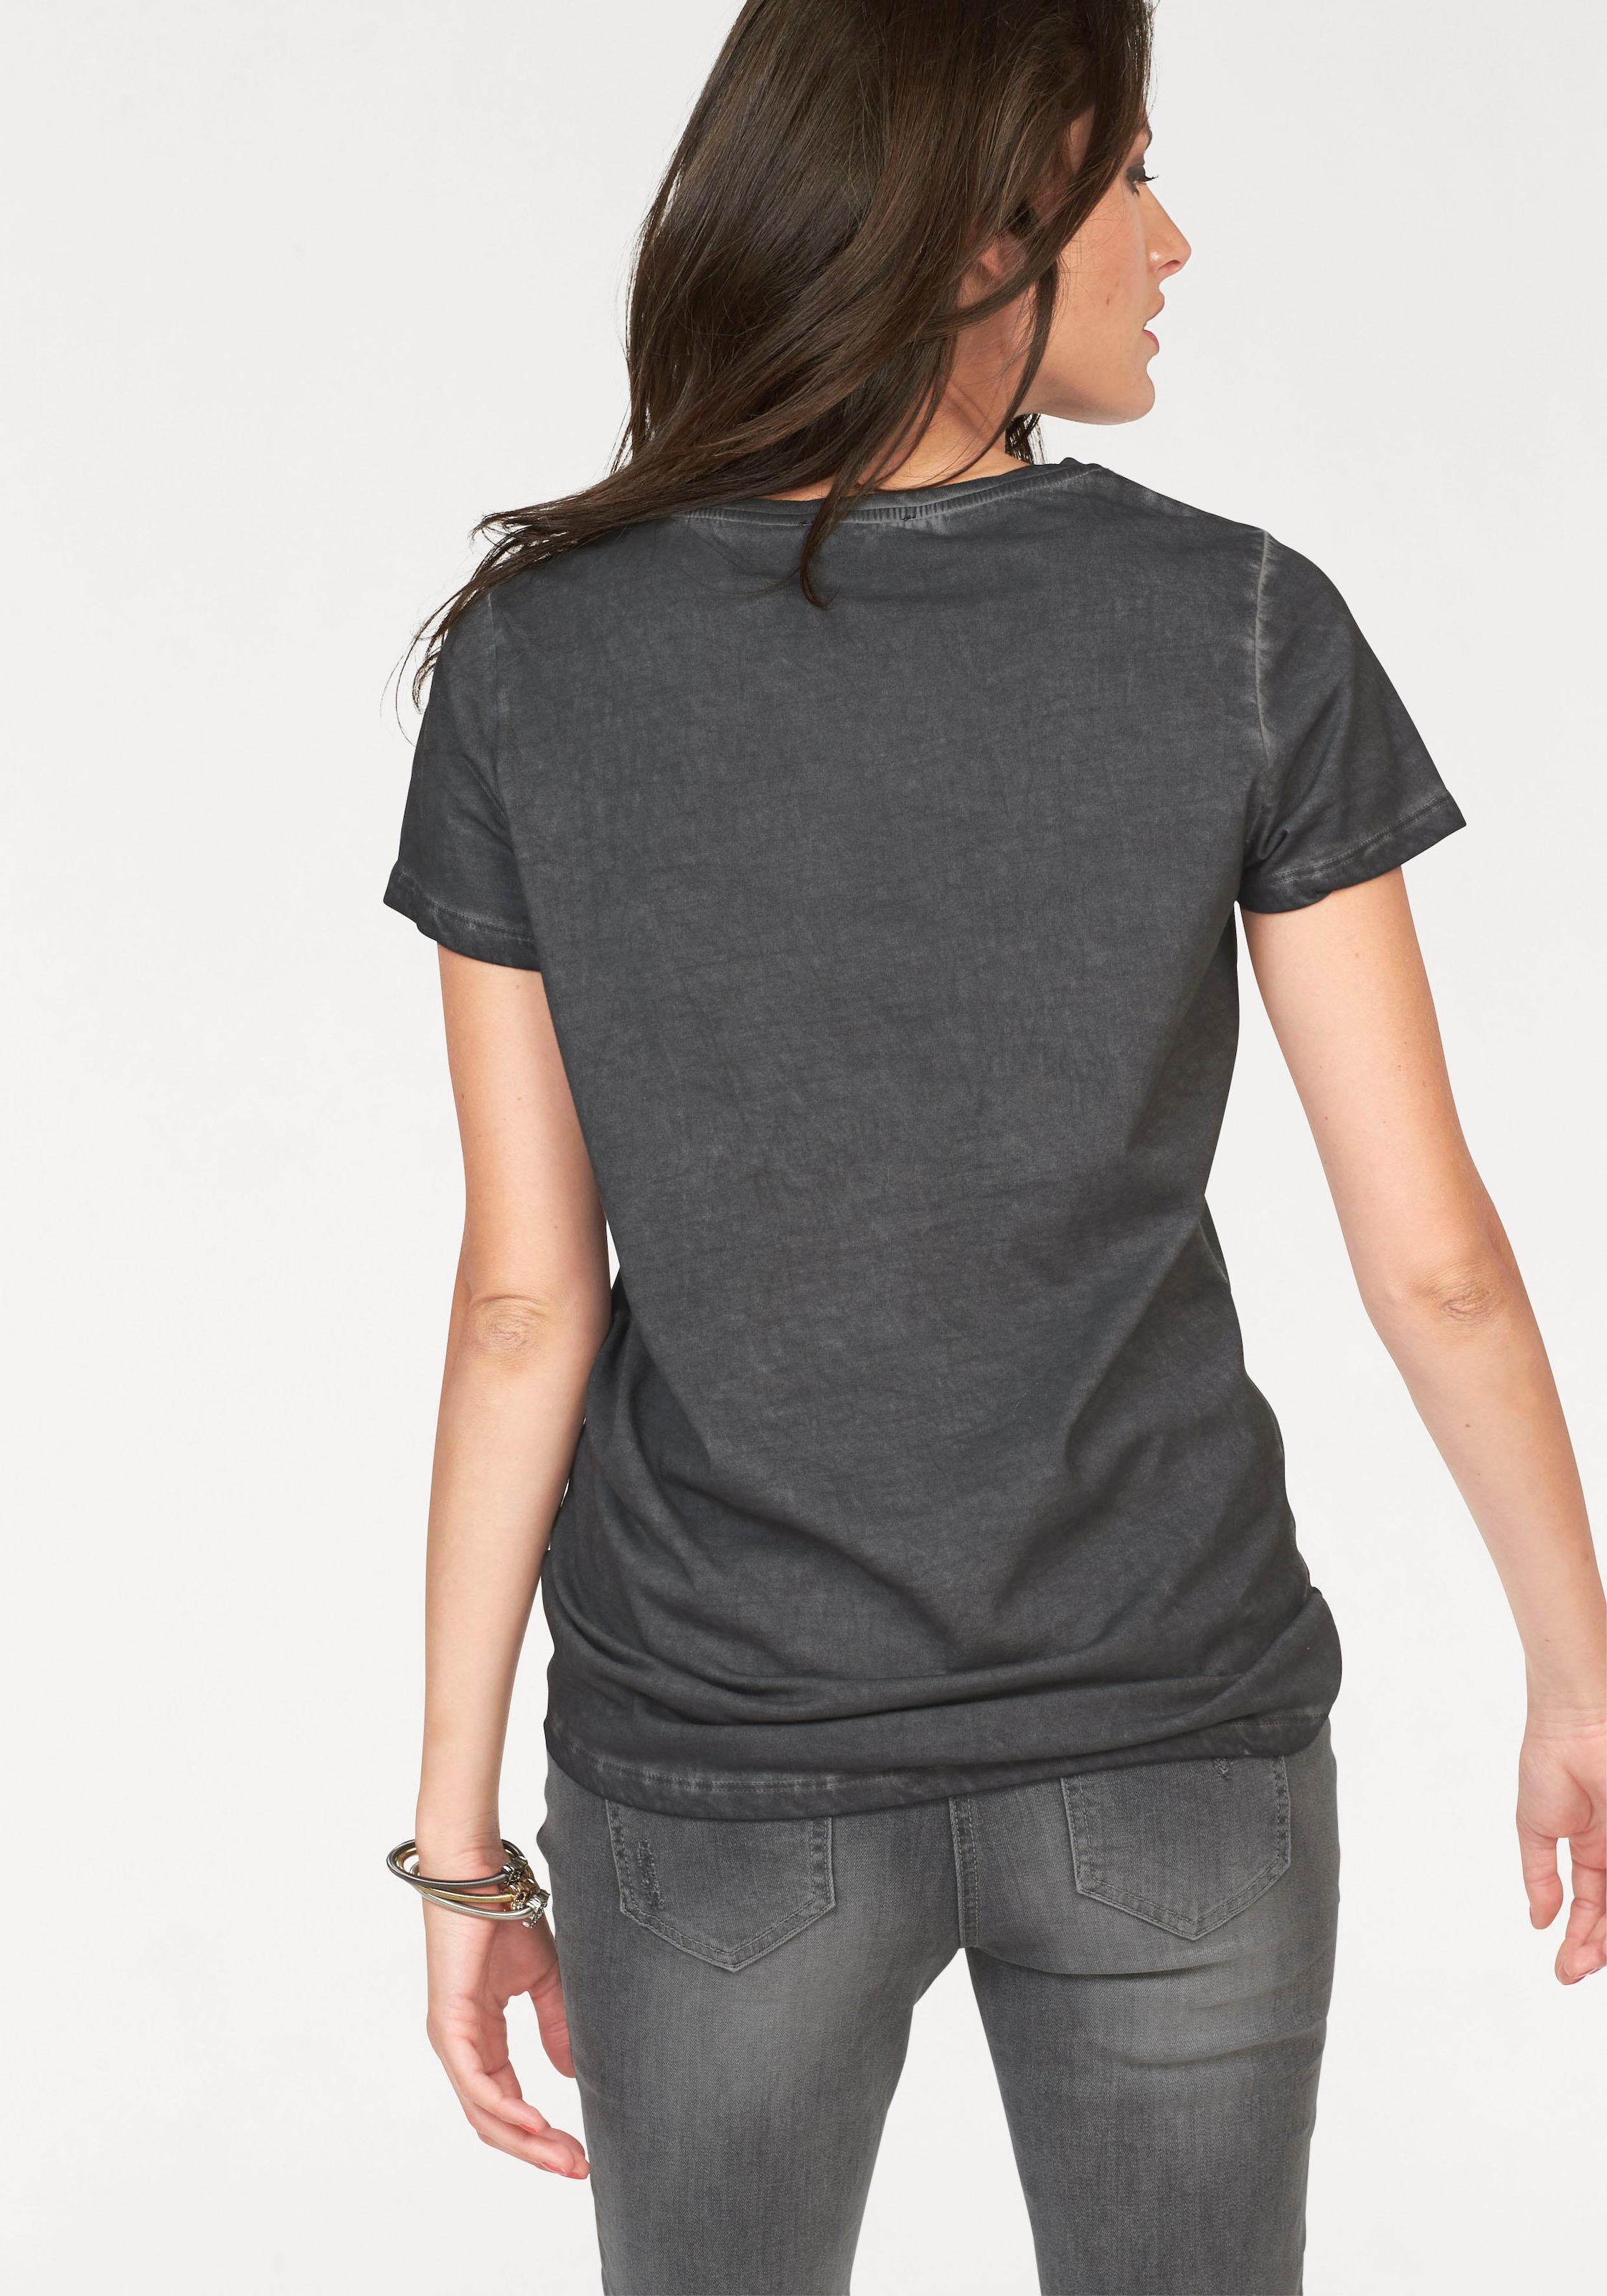 ♕ Aniston CASUAL dyed-Waschung bei mit Oil T-Shirt,